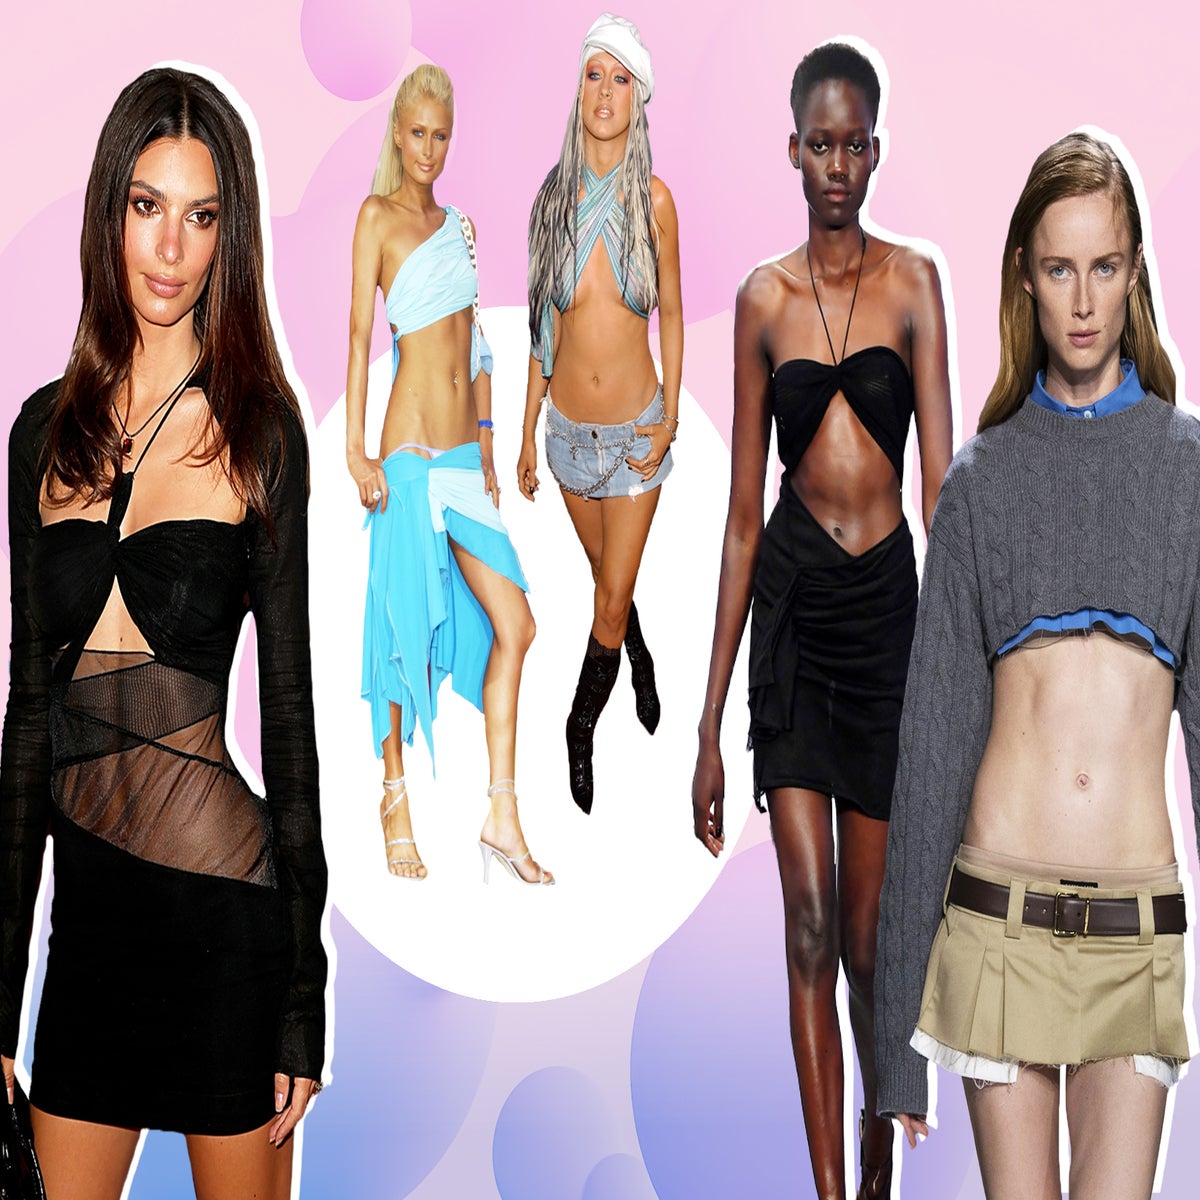 Could the rise of Y2K fashion trigger a return to size zero culture?